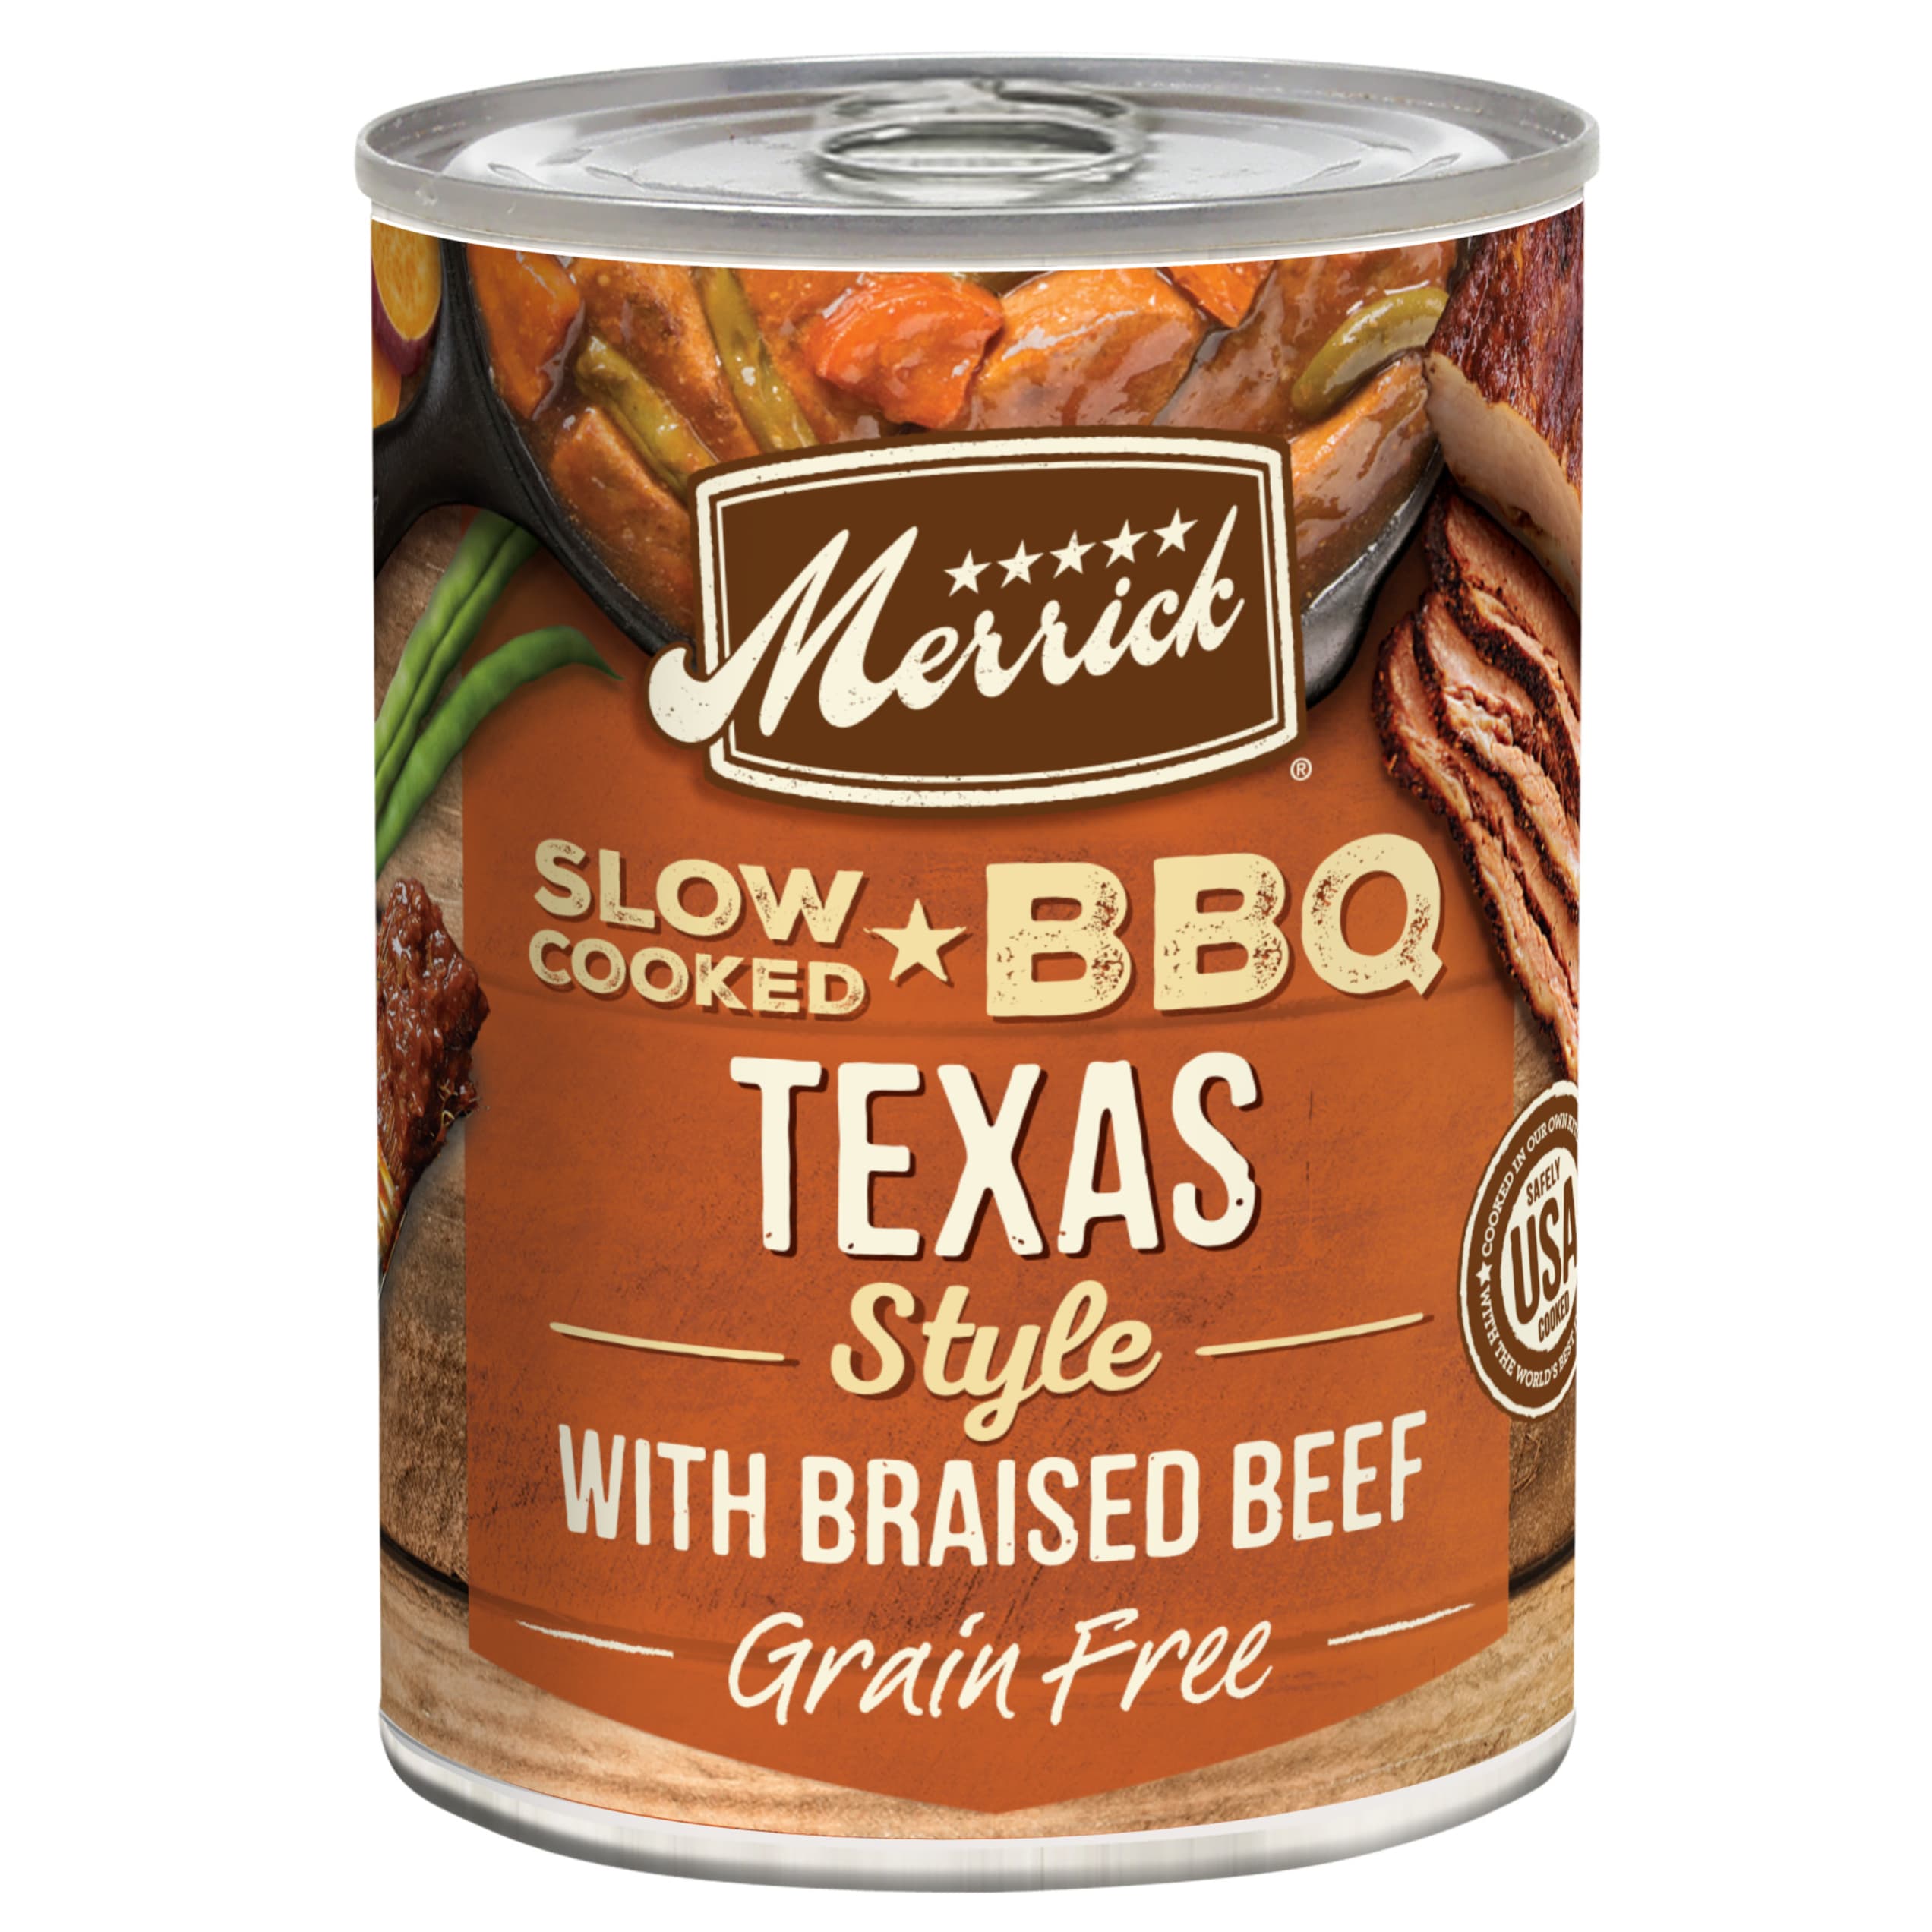 Merrick Grain Free Slow-Cooked BBQ Texas Style with Braised Beef Wet Dog Food, 12.7 oz., Case of 12 | Petco